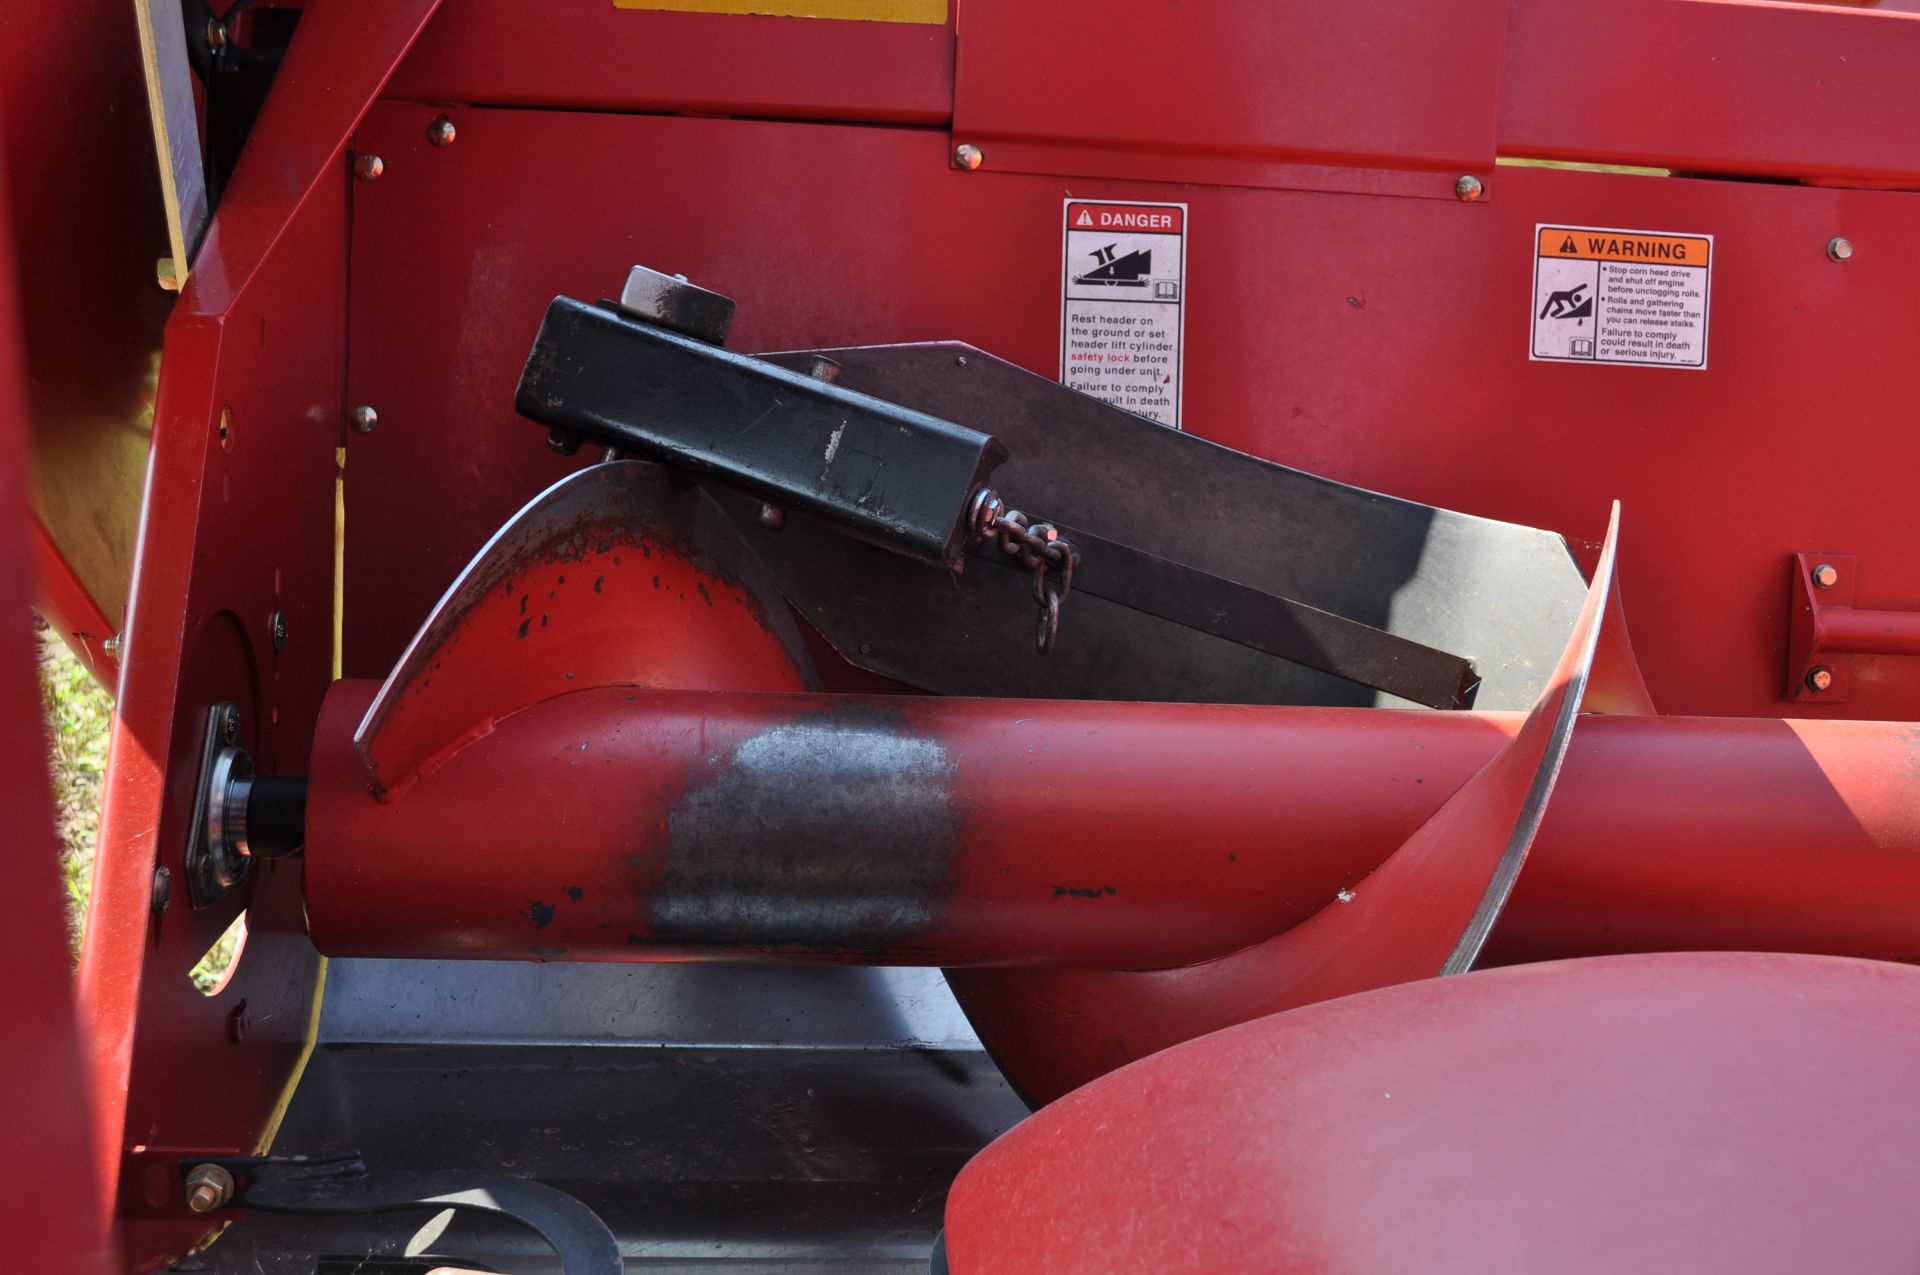 Case IH 3406 corn head, knife rolls, hyd deck plates, poly, 2 stalk stompers, header height control - Image 14 of 20